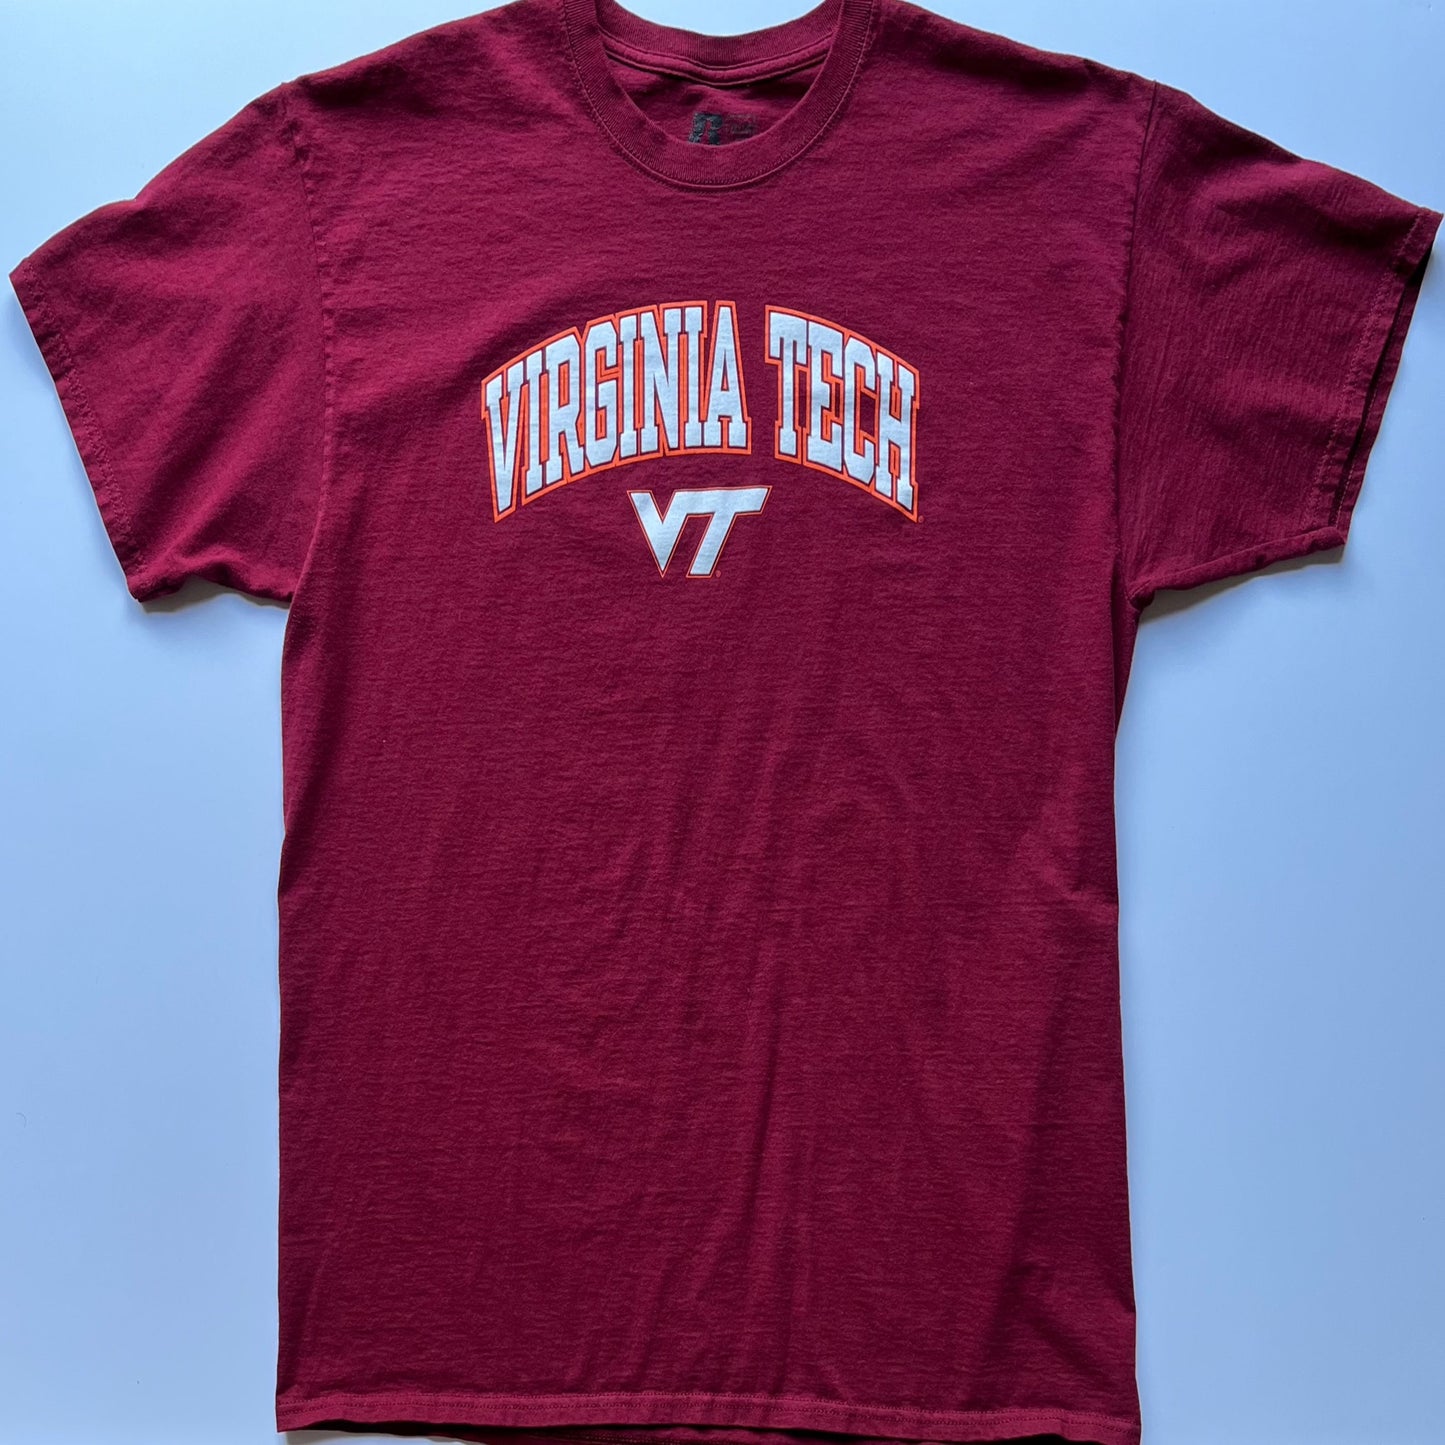 Virginia Tech - Russell Athletic Tee (X-Large)